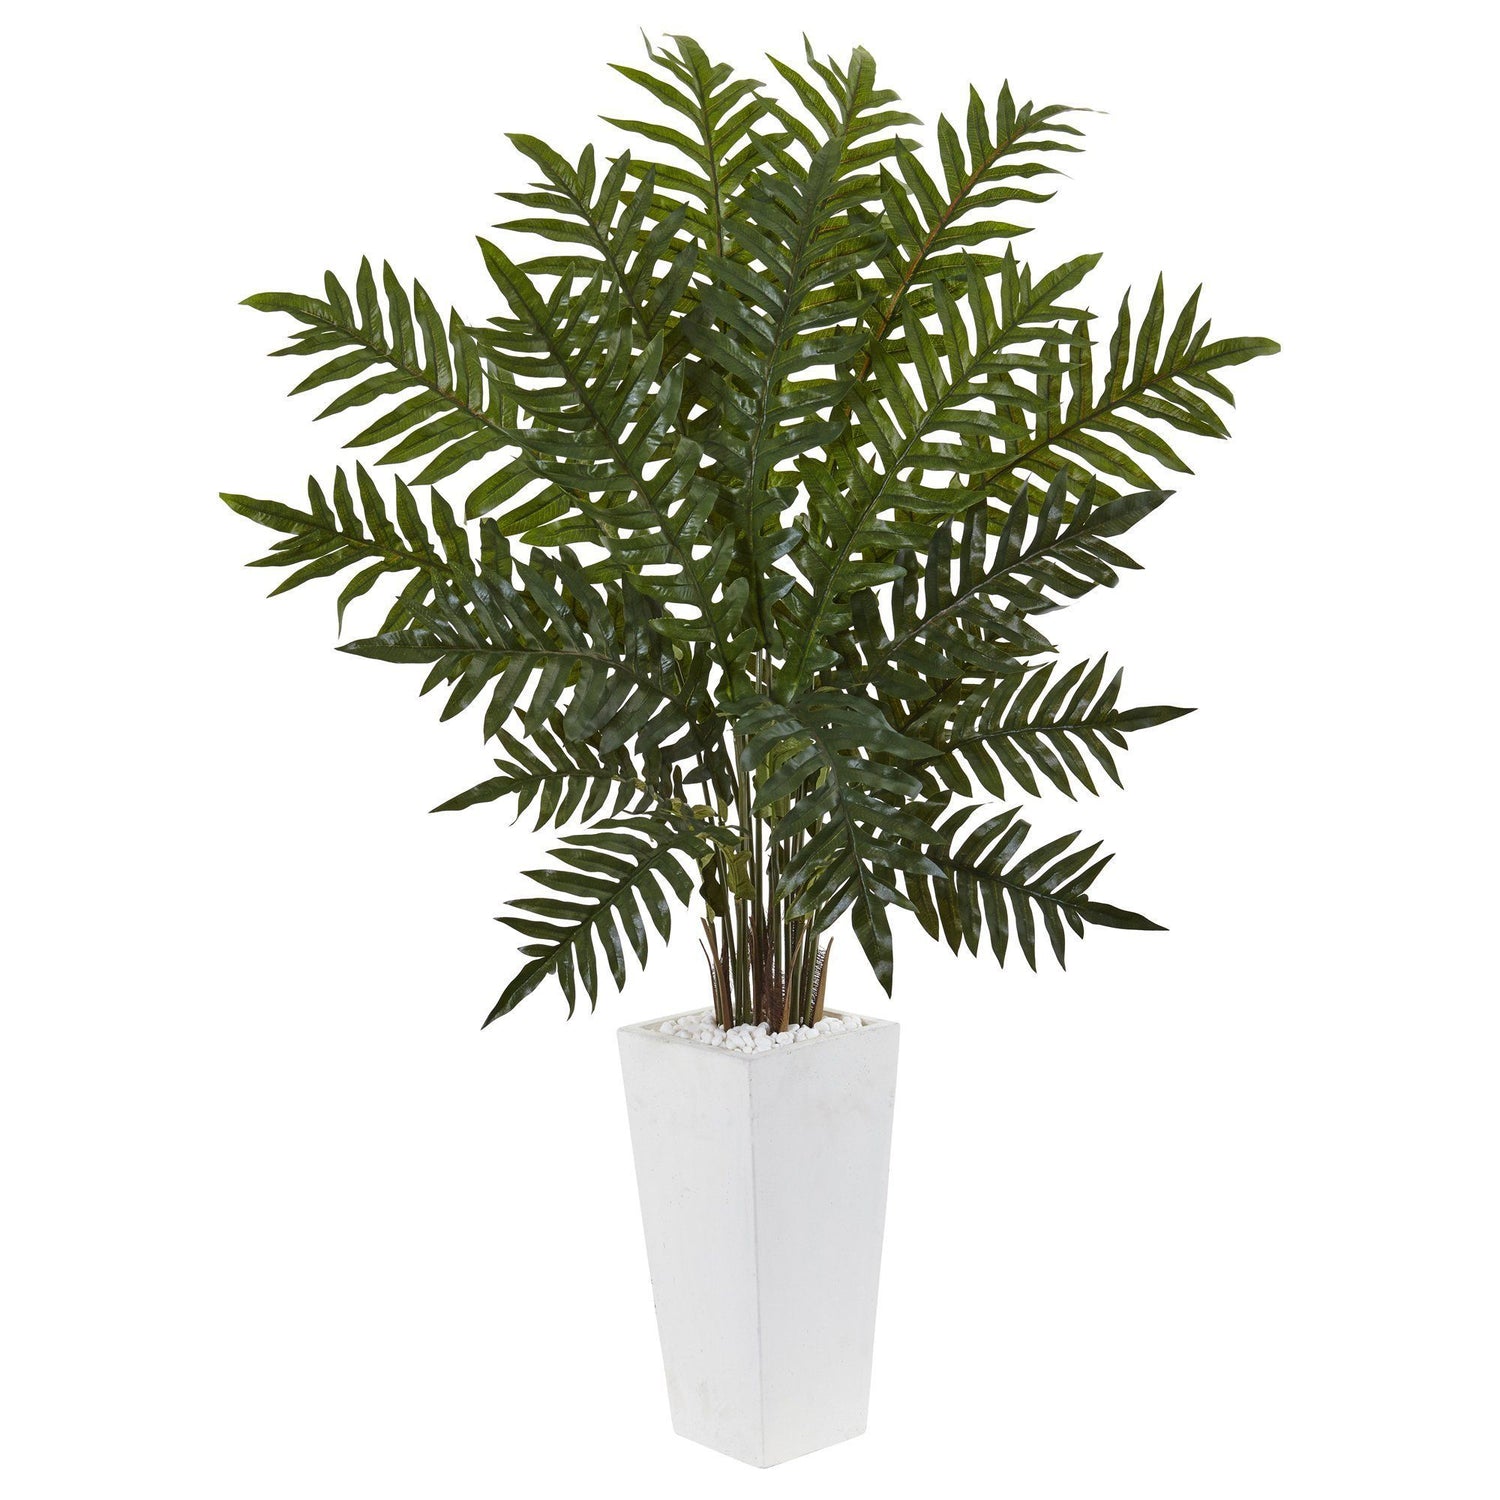 4.5’ Evergreen Plant in White Tower Planter